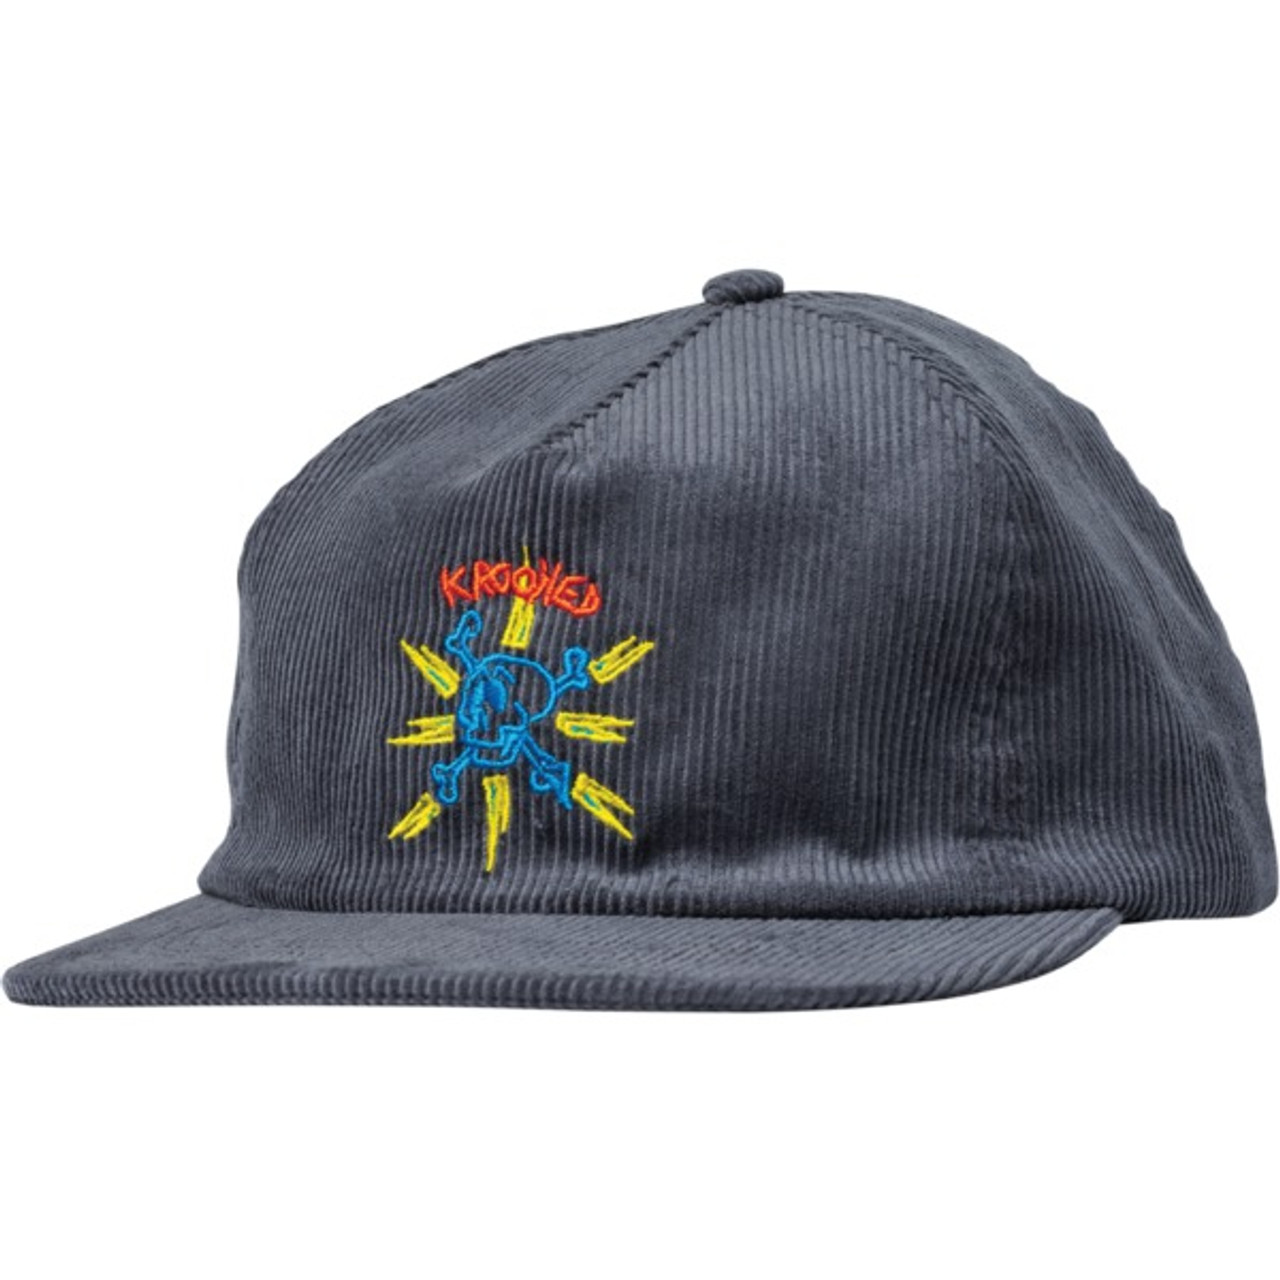 Krooked Style Corduroy Hat Charcoal Blue Red Snapback